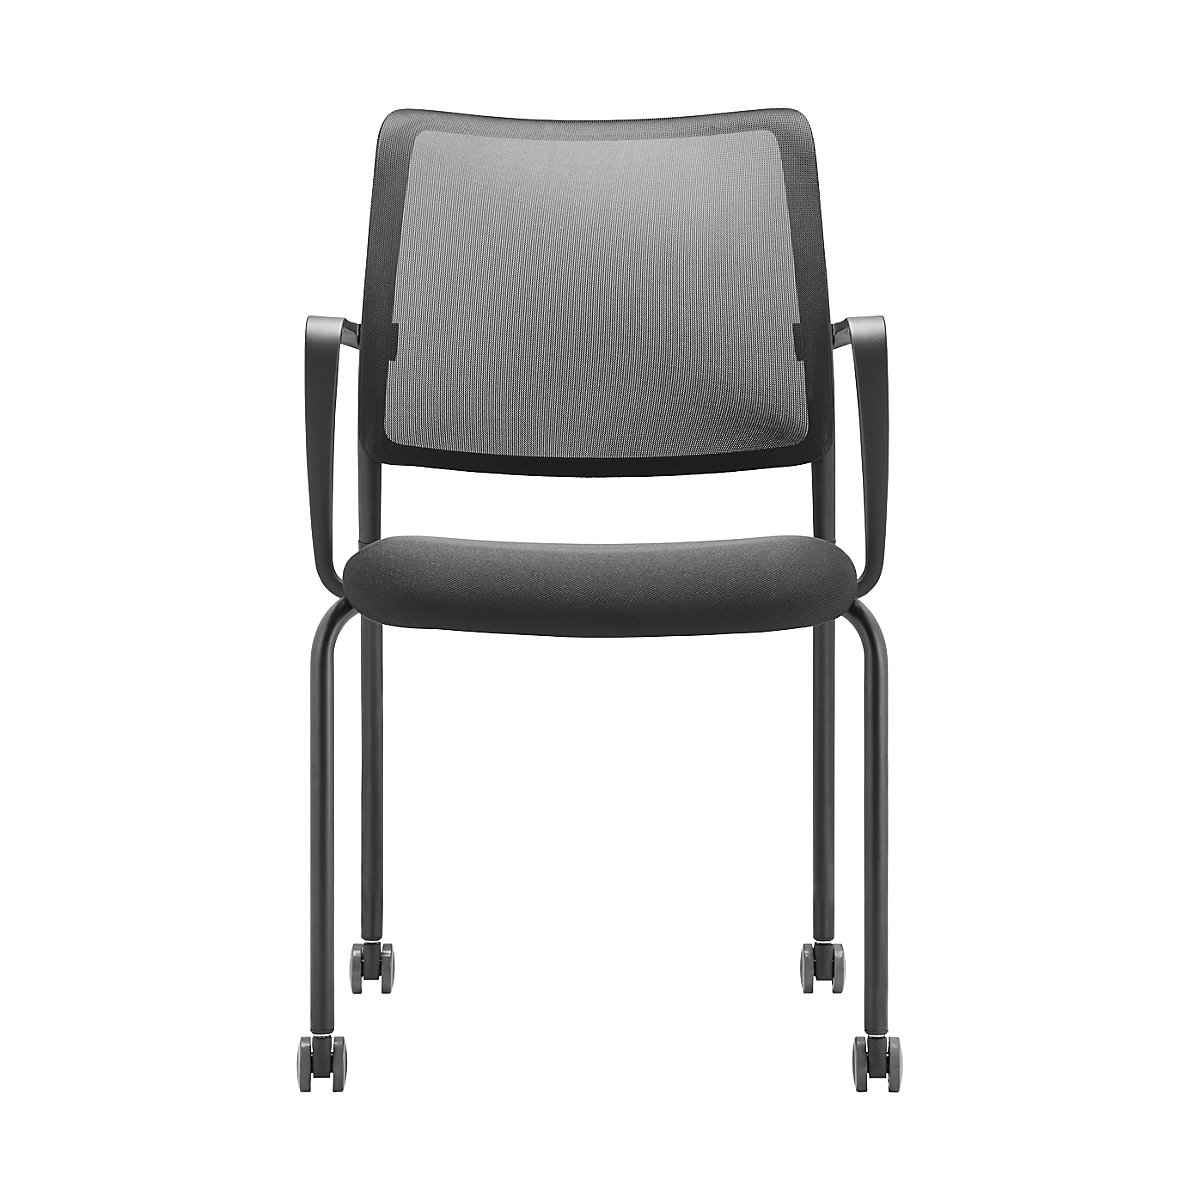 TO-SYNC meet meeting room chair – TrendOffice, with mesh back rest, pack of 4, black, with arm rests and castors-1